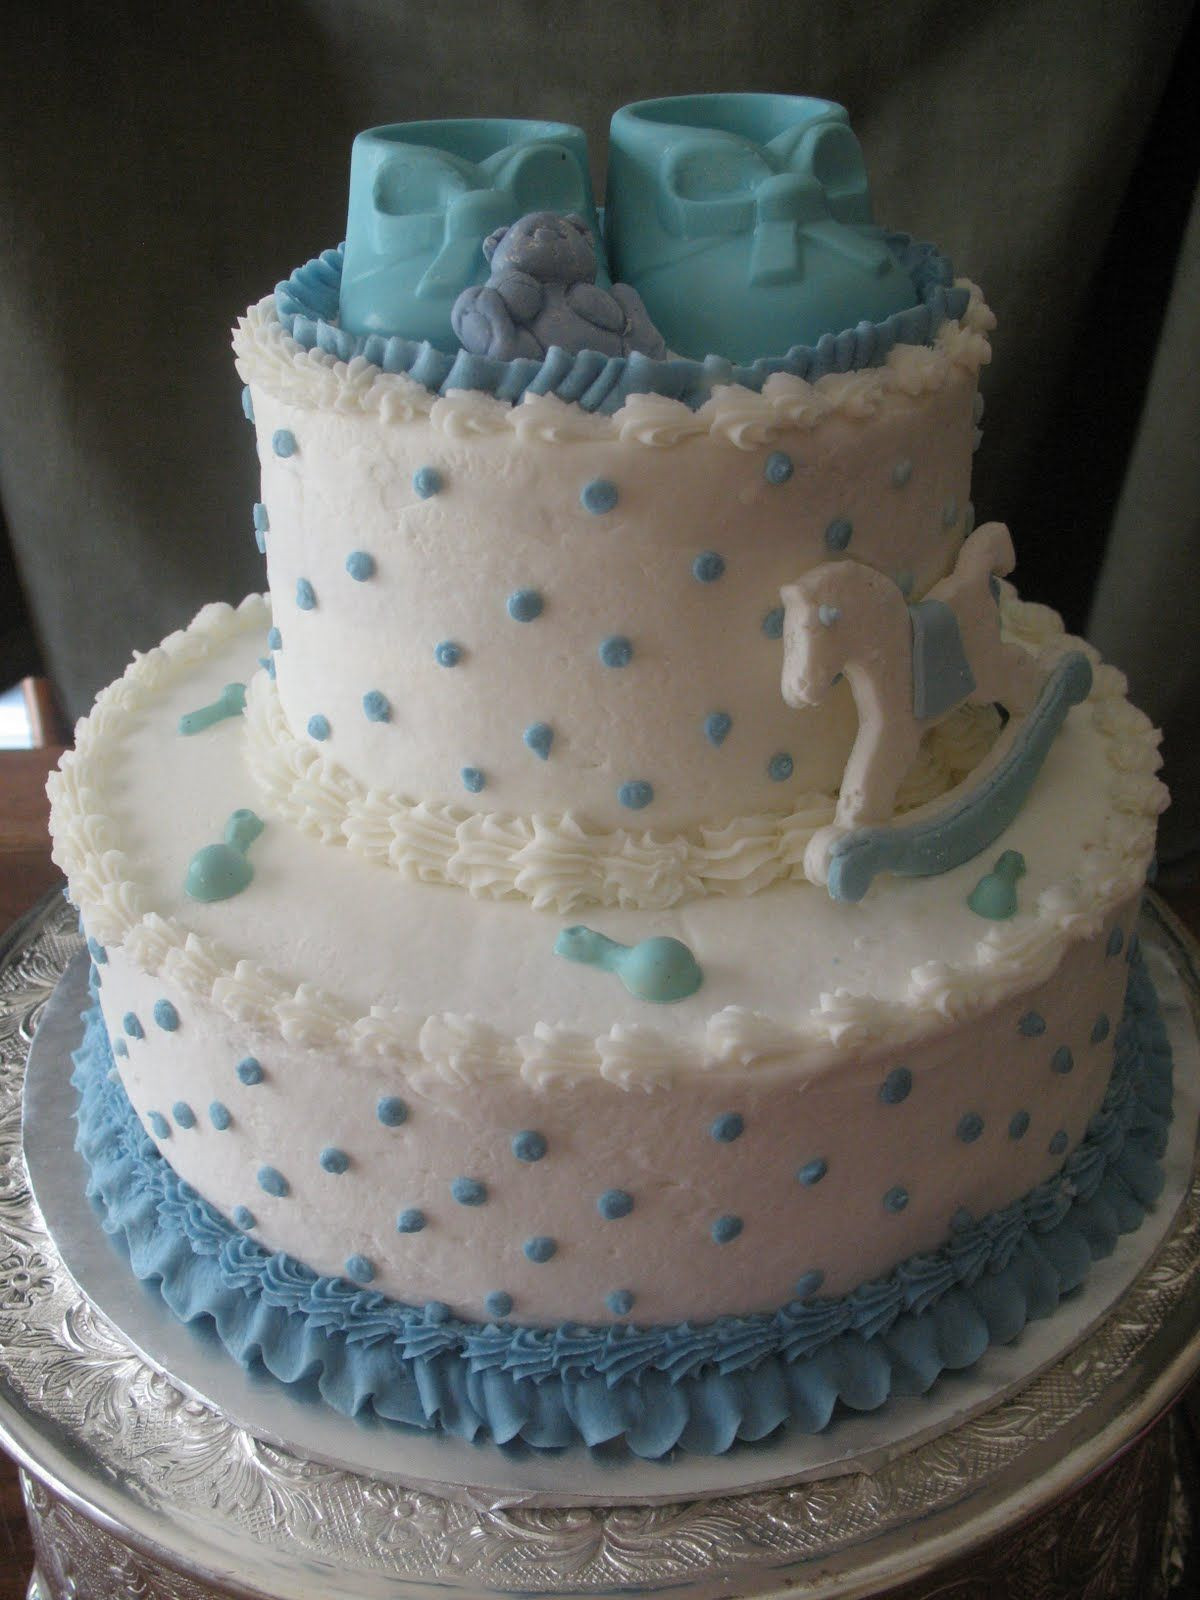 Easy Cake Decorating Ideas For Baby Shower
 BUTTER CREAM BABYSHOWWER CAKES